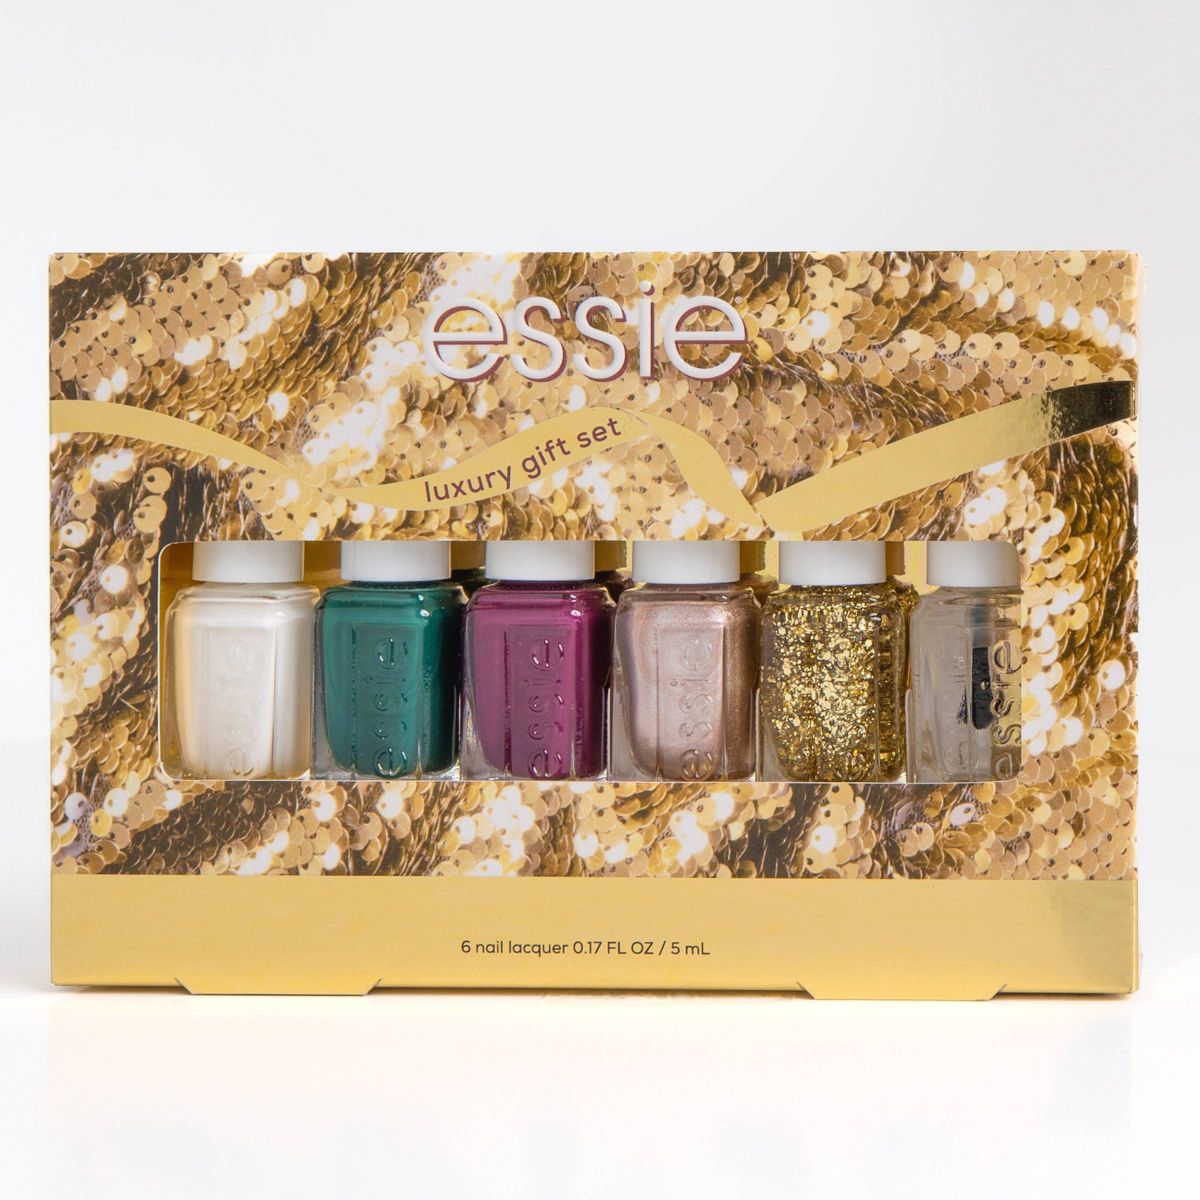 essie Limited Edition Holiday Nail Polish Gift Set - 6pc | Target